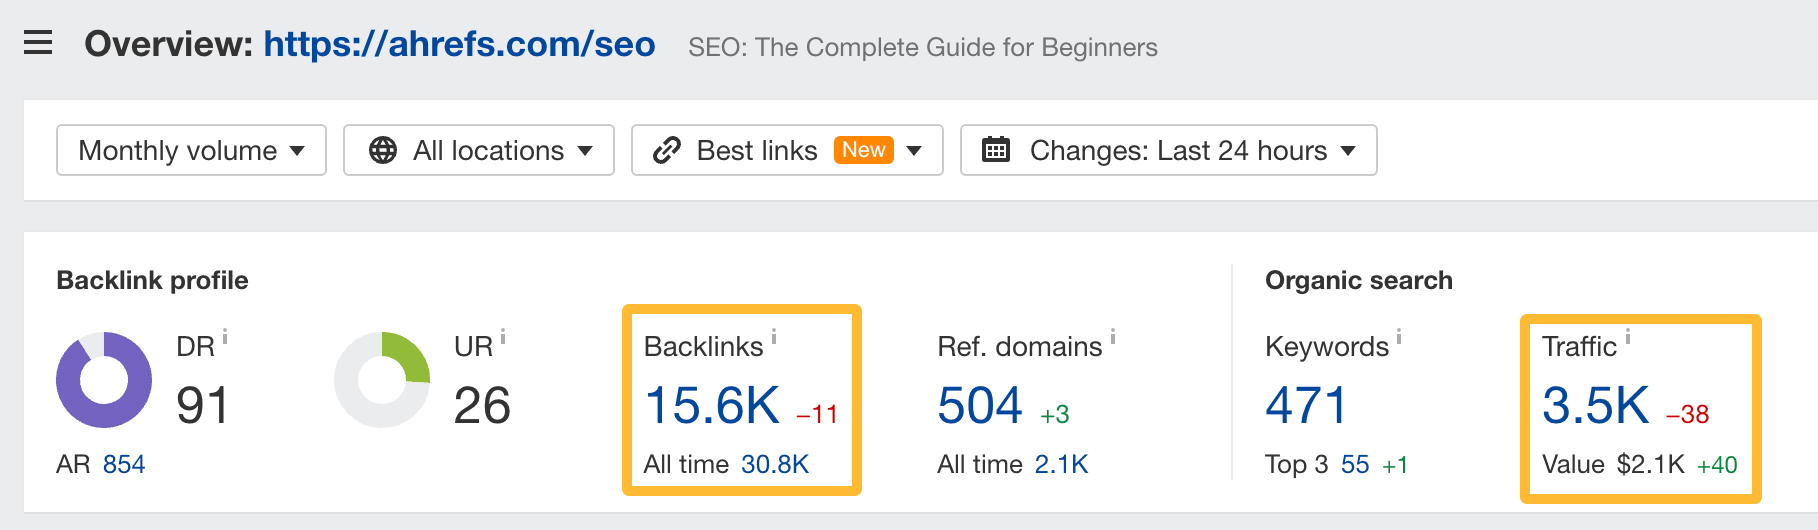 backlink-and-organic-search-traffic-data-via-ahref 12 Field-Tested Content Marketing Tactics